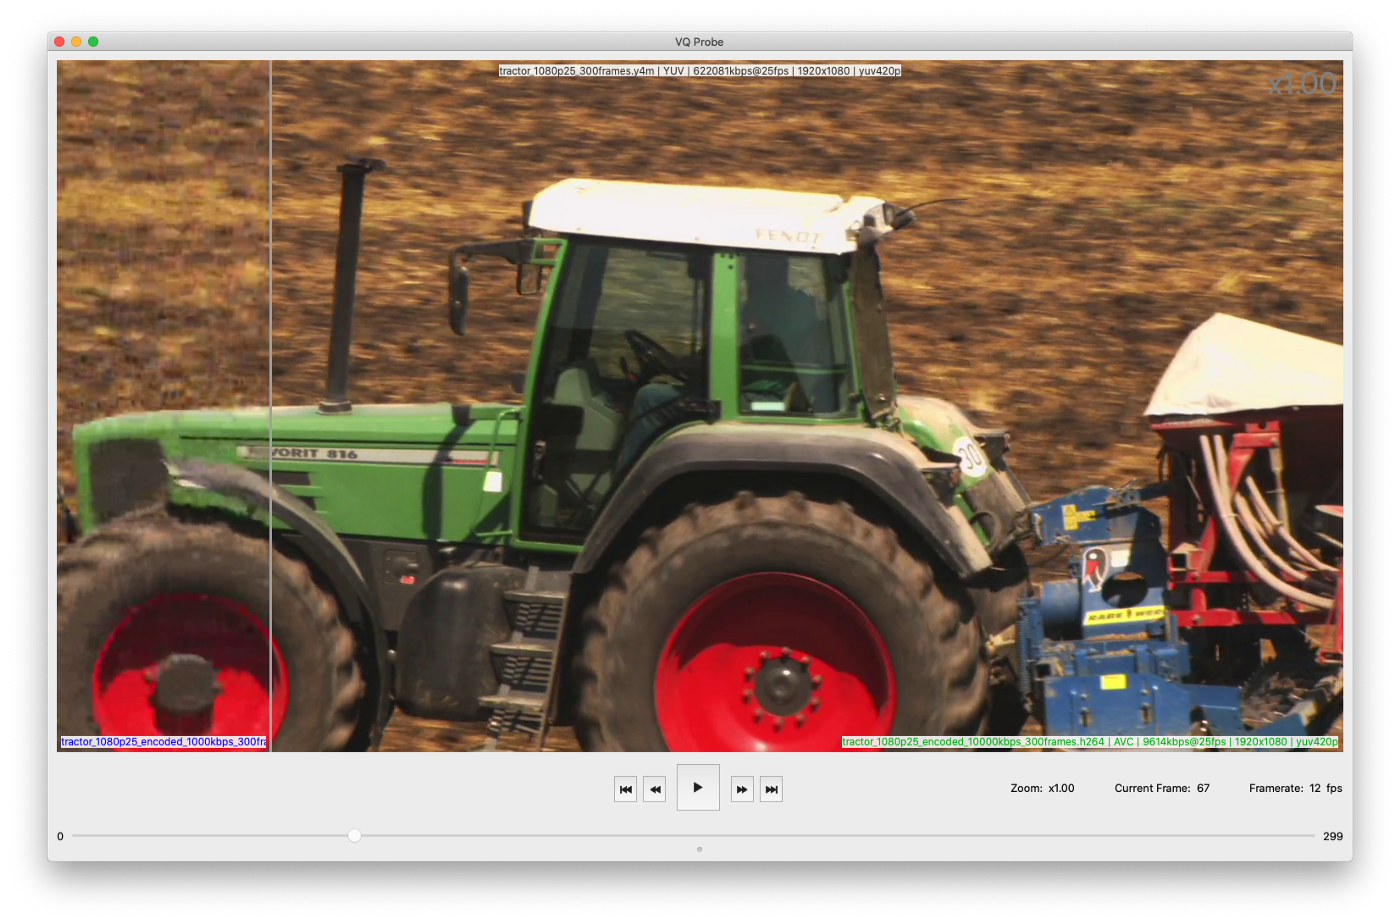 tractor_1080p25_encoded_1000kbps_300frames.h264 vs. tractor_1080p25_encoded_10000kbps_300frames.h264